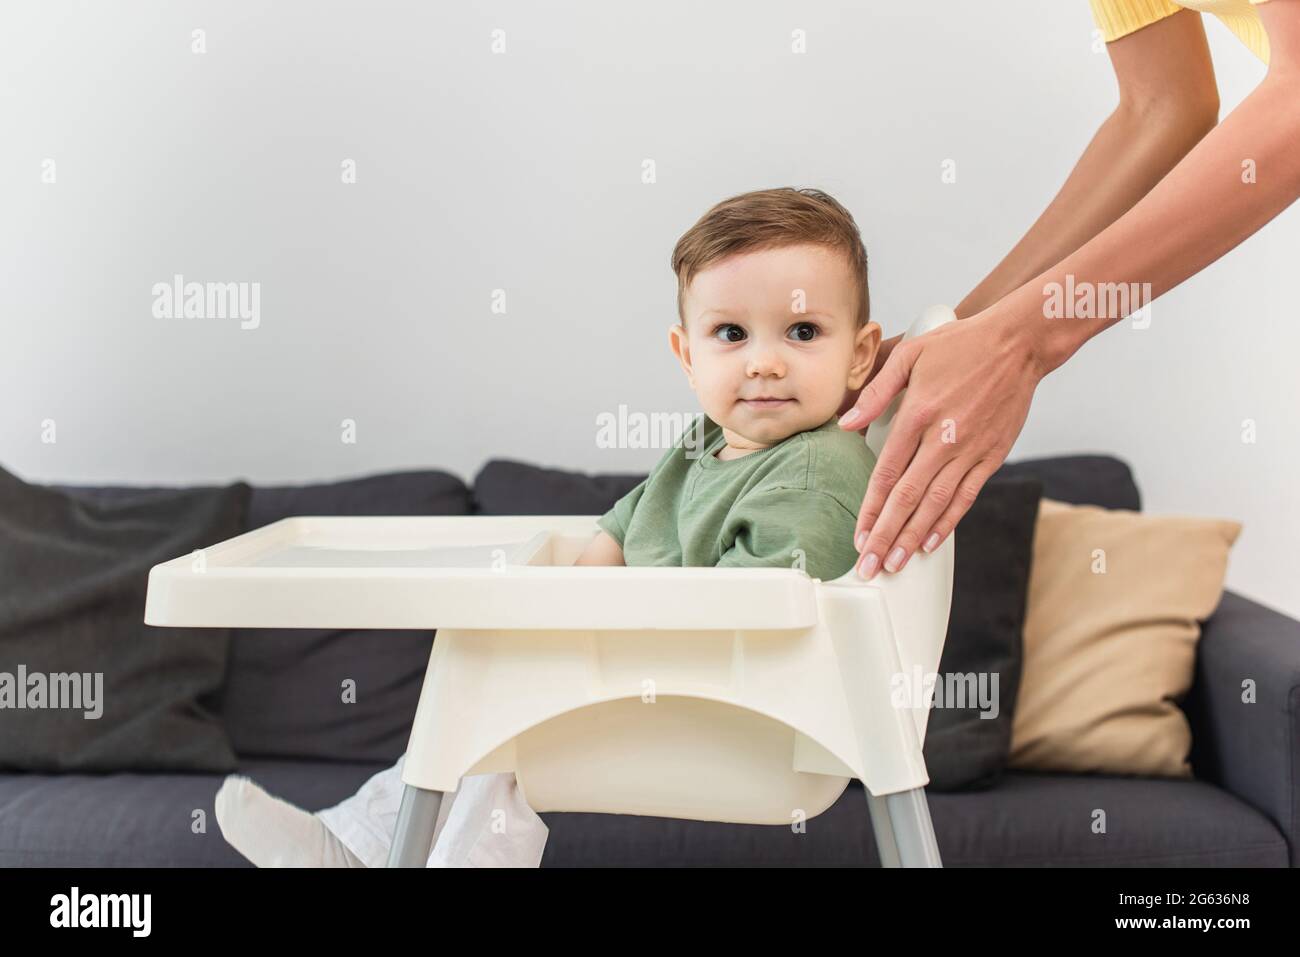 Mother standing near toddler boy on high chair at home Stock Photo